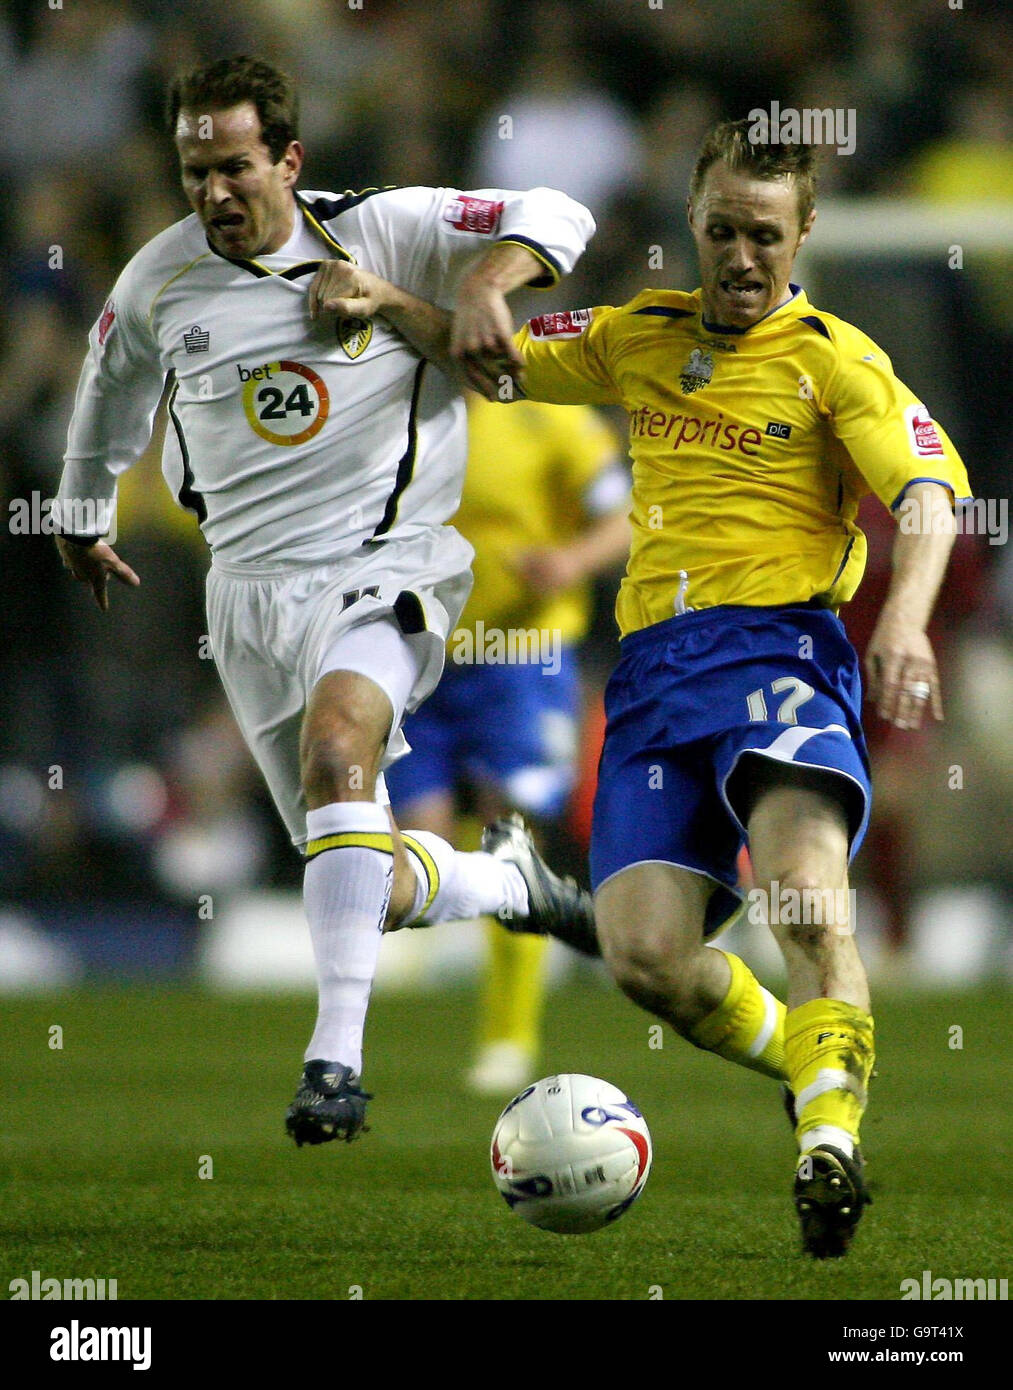 Leeds United's Eddie Lewis battles (left) for the ball with Preston's Brett Ormerod during the Coca-Cola Championship match at Elland Road, Leeds. Stock Photo